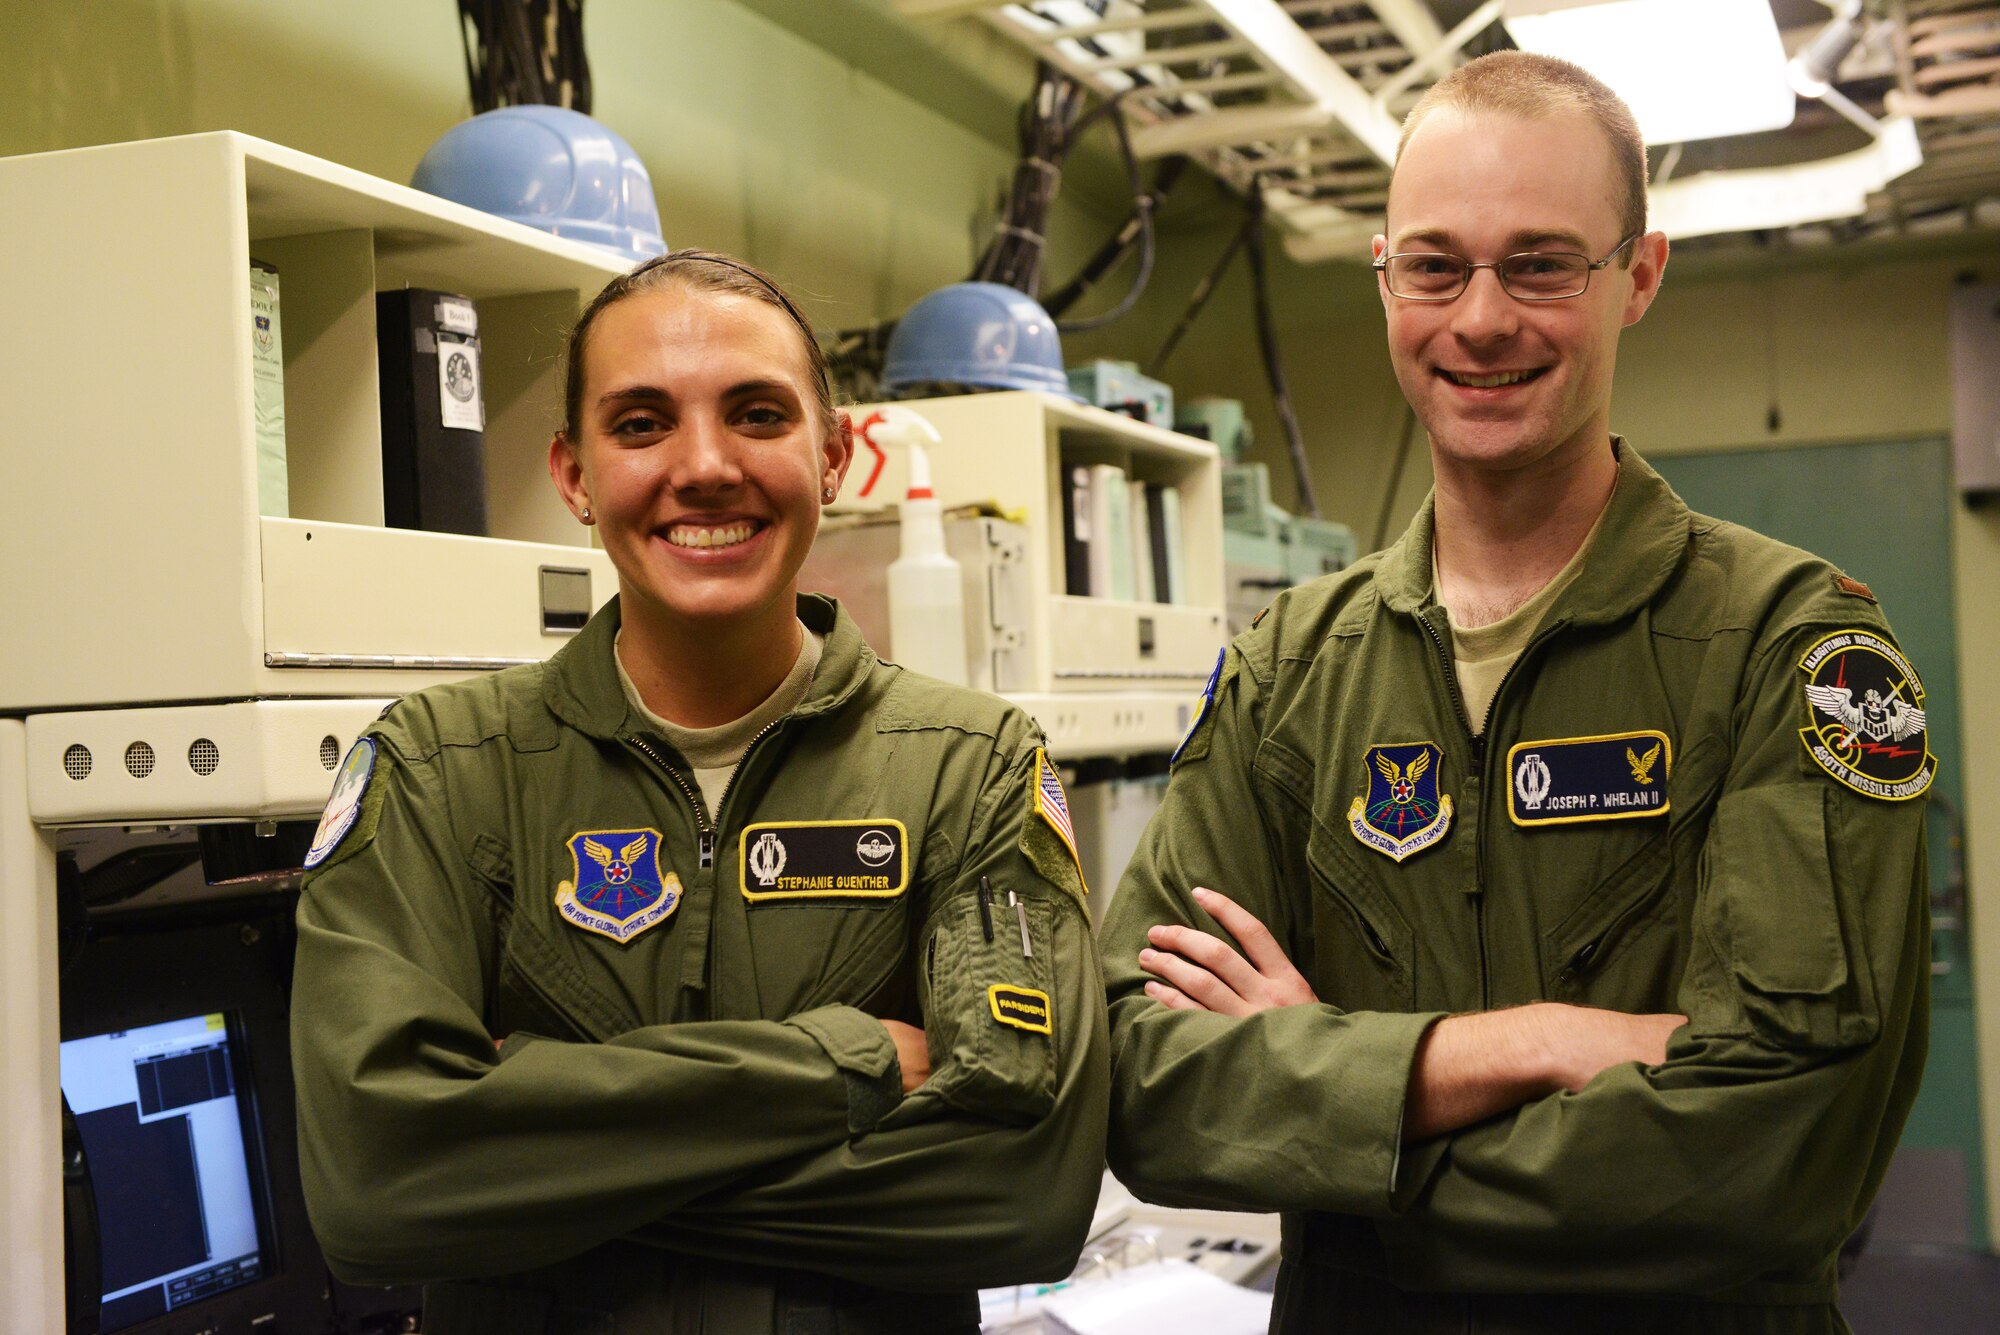 1st Lt. Stephanie Guenther, 490th Missile Squadron combat missile crew commander (left), and 2nd Lt. Joseph Whelan, 490th MS deputy missile combat crew commander, pose for a photograph after a training session at Malmstrom Air Force Base Sept. 24. The team is one of nine from the base that will be competing in the 2014 Air Force Global Strike Challenge. (U.S. Air Force photo/Airman 1st Class Collin Schmidt)